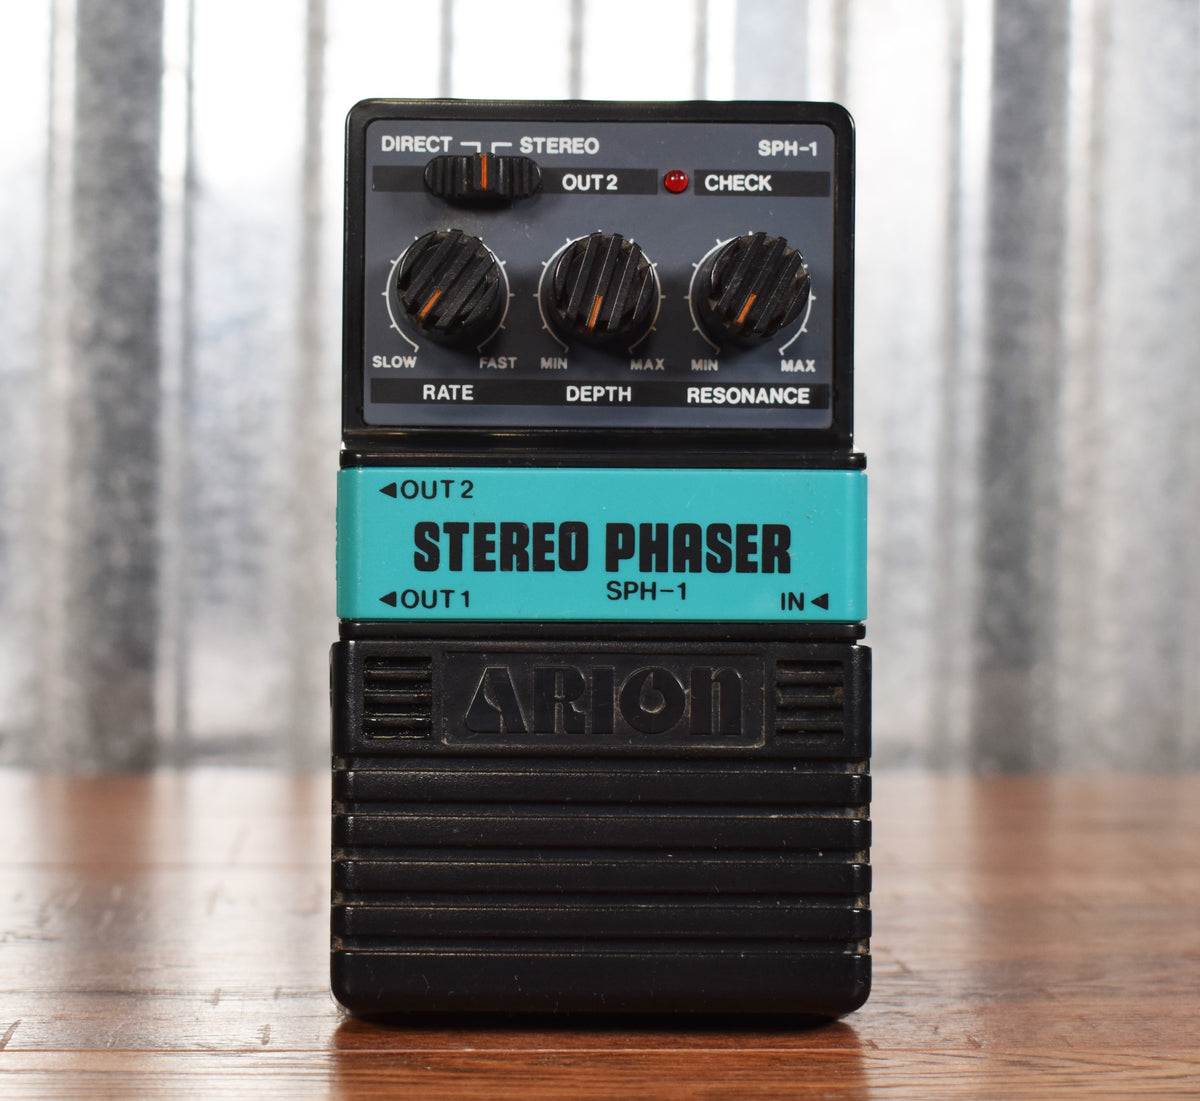 You are looking for an Arion SPH-1 Stereo Phaser Guitar Effect